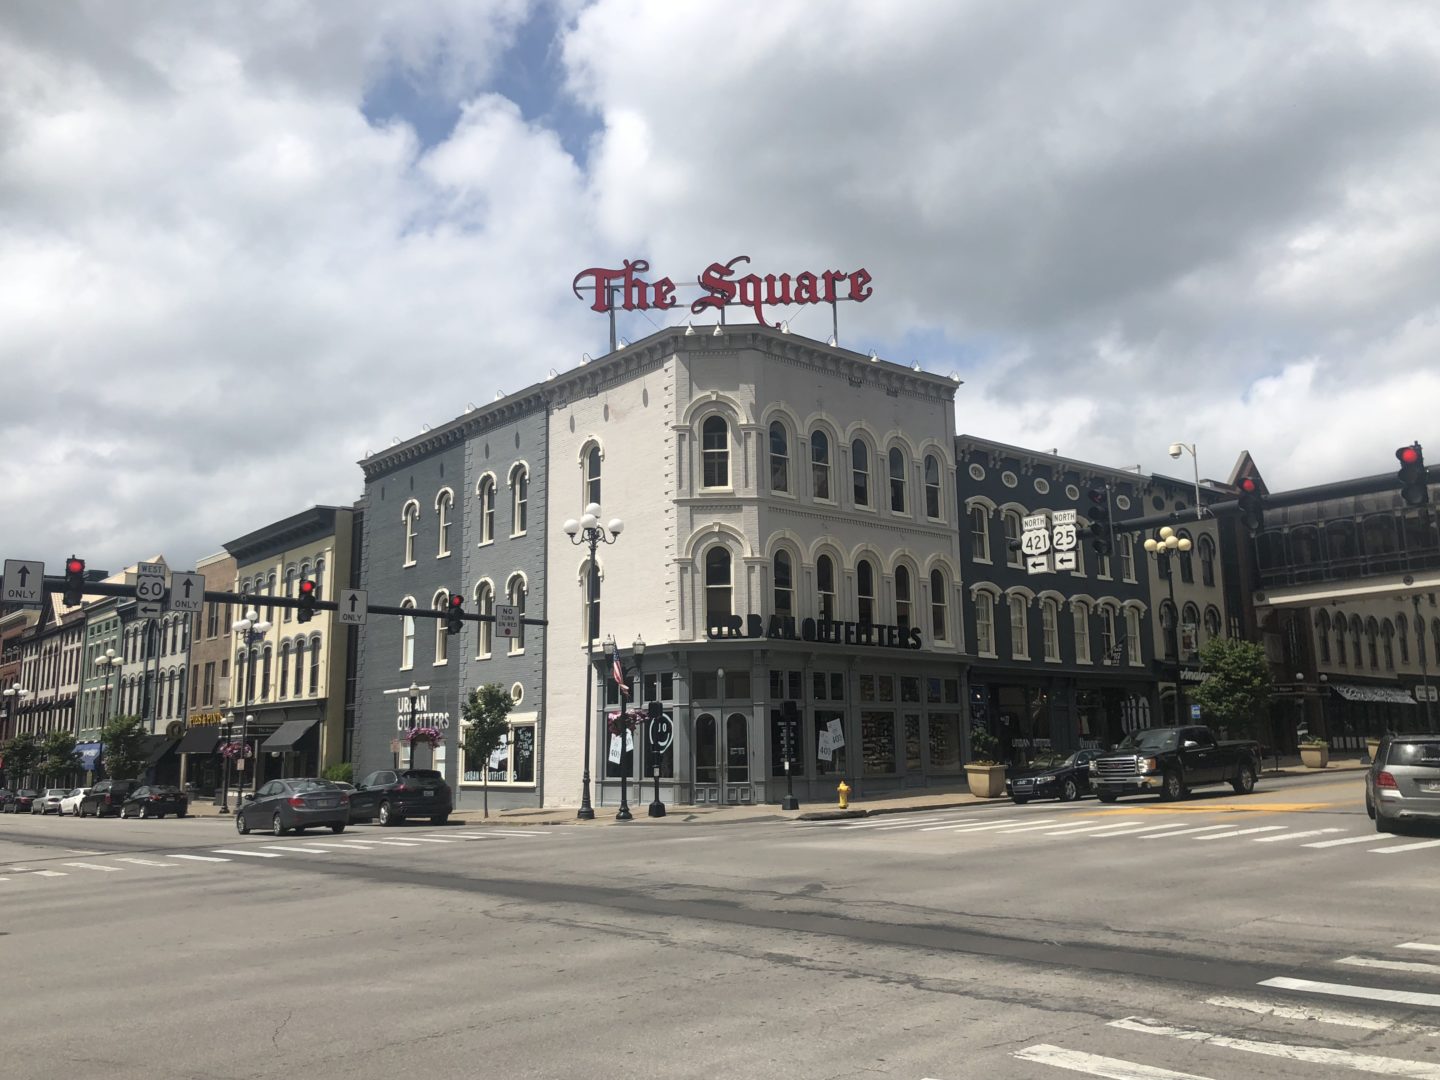 downtown of a city with a sign that says "the square"